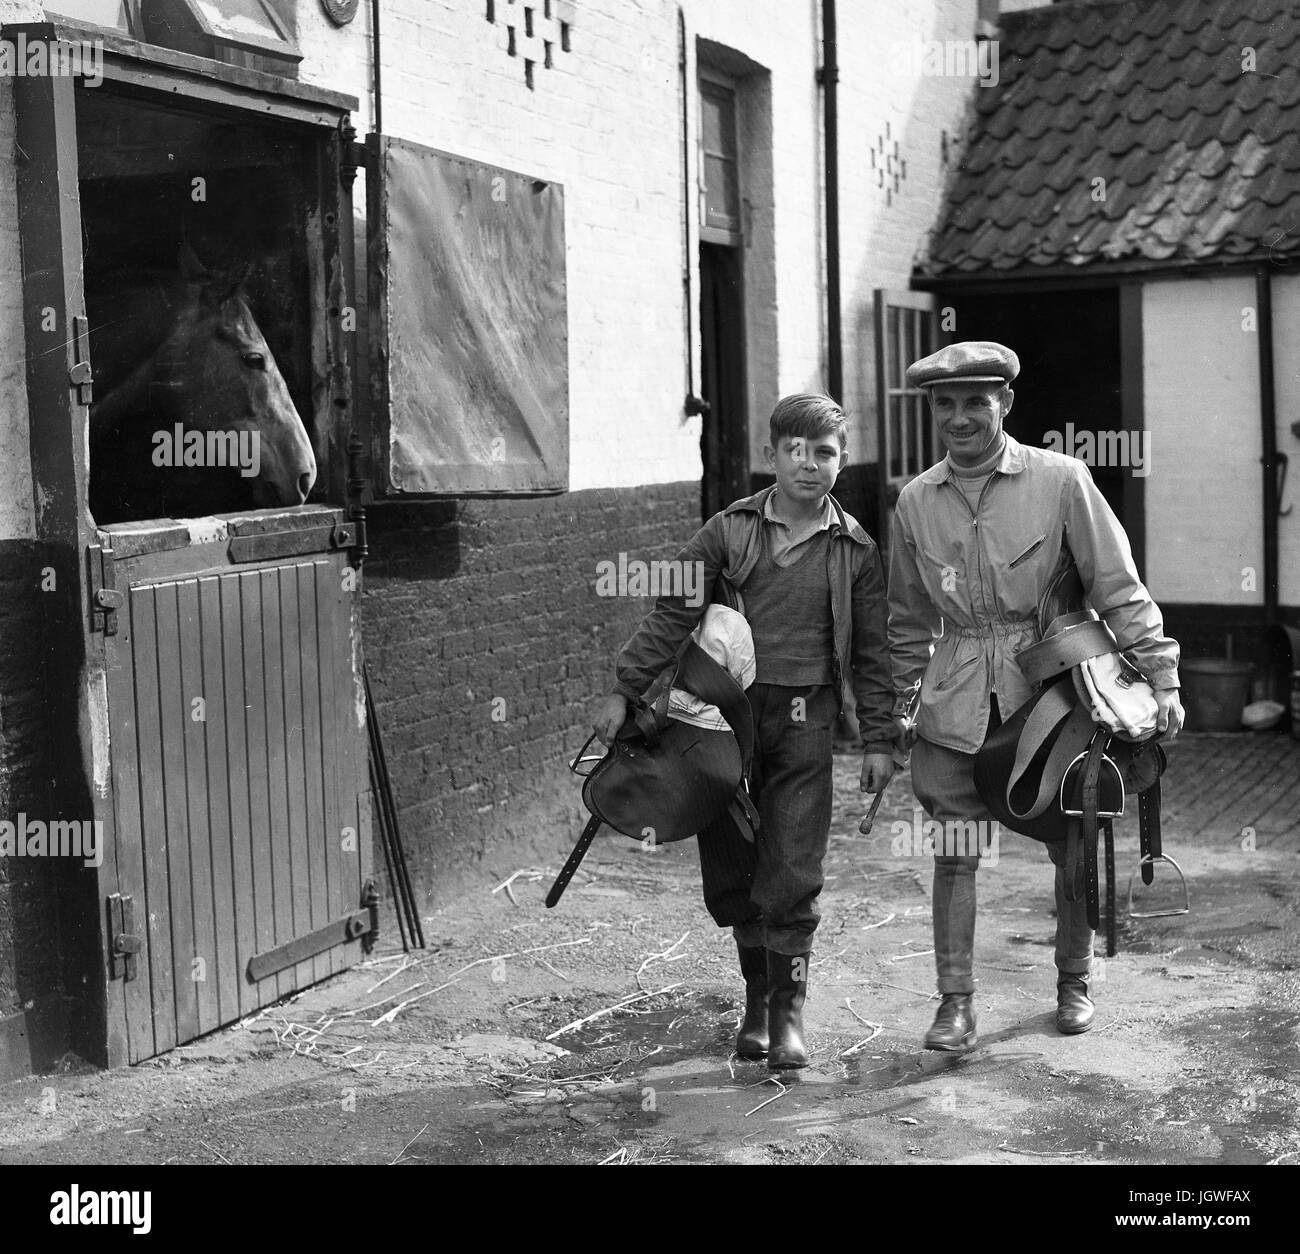 Jockey and stable lad at racing stables Britain 1950s Stock Photo